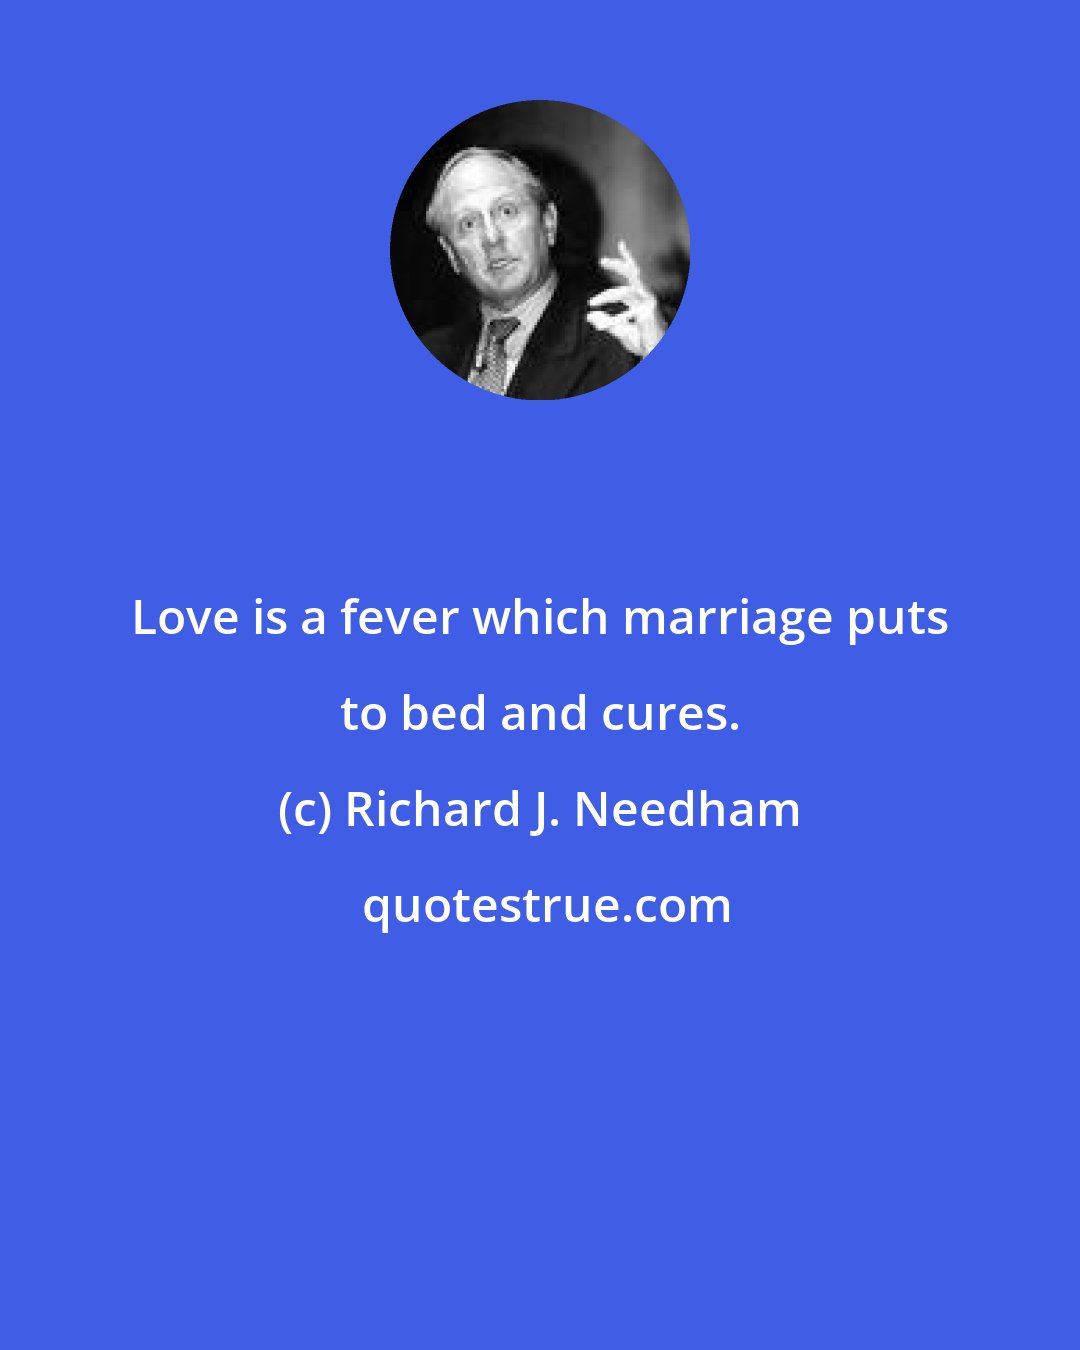 Richard J. Needham: Love is a fever which marriage puts to bed and cures.